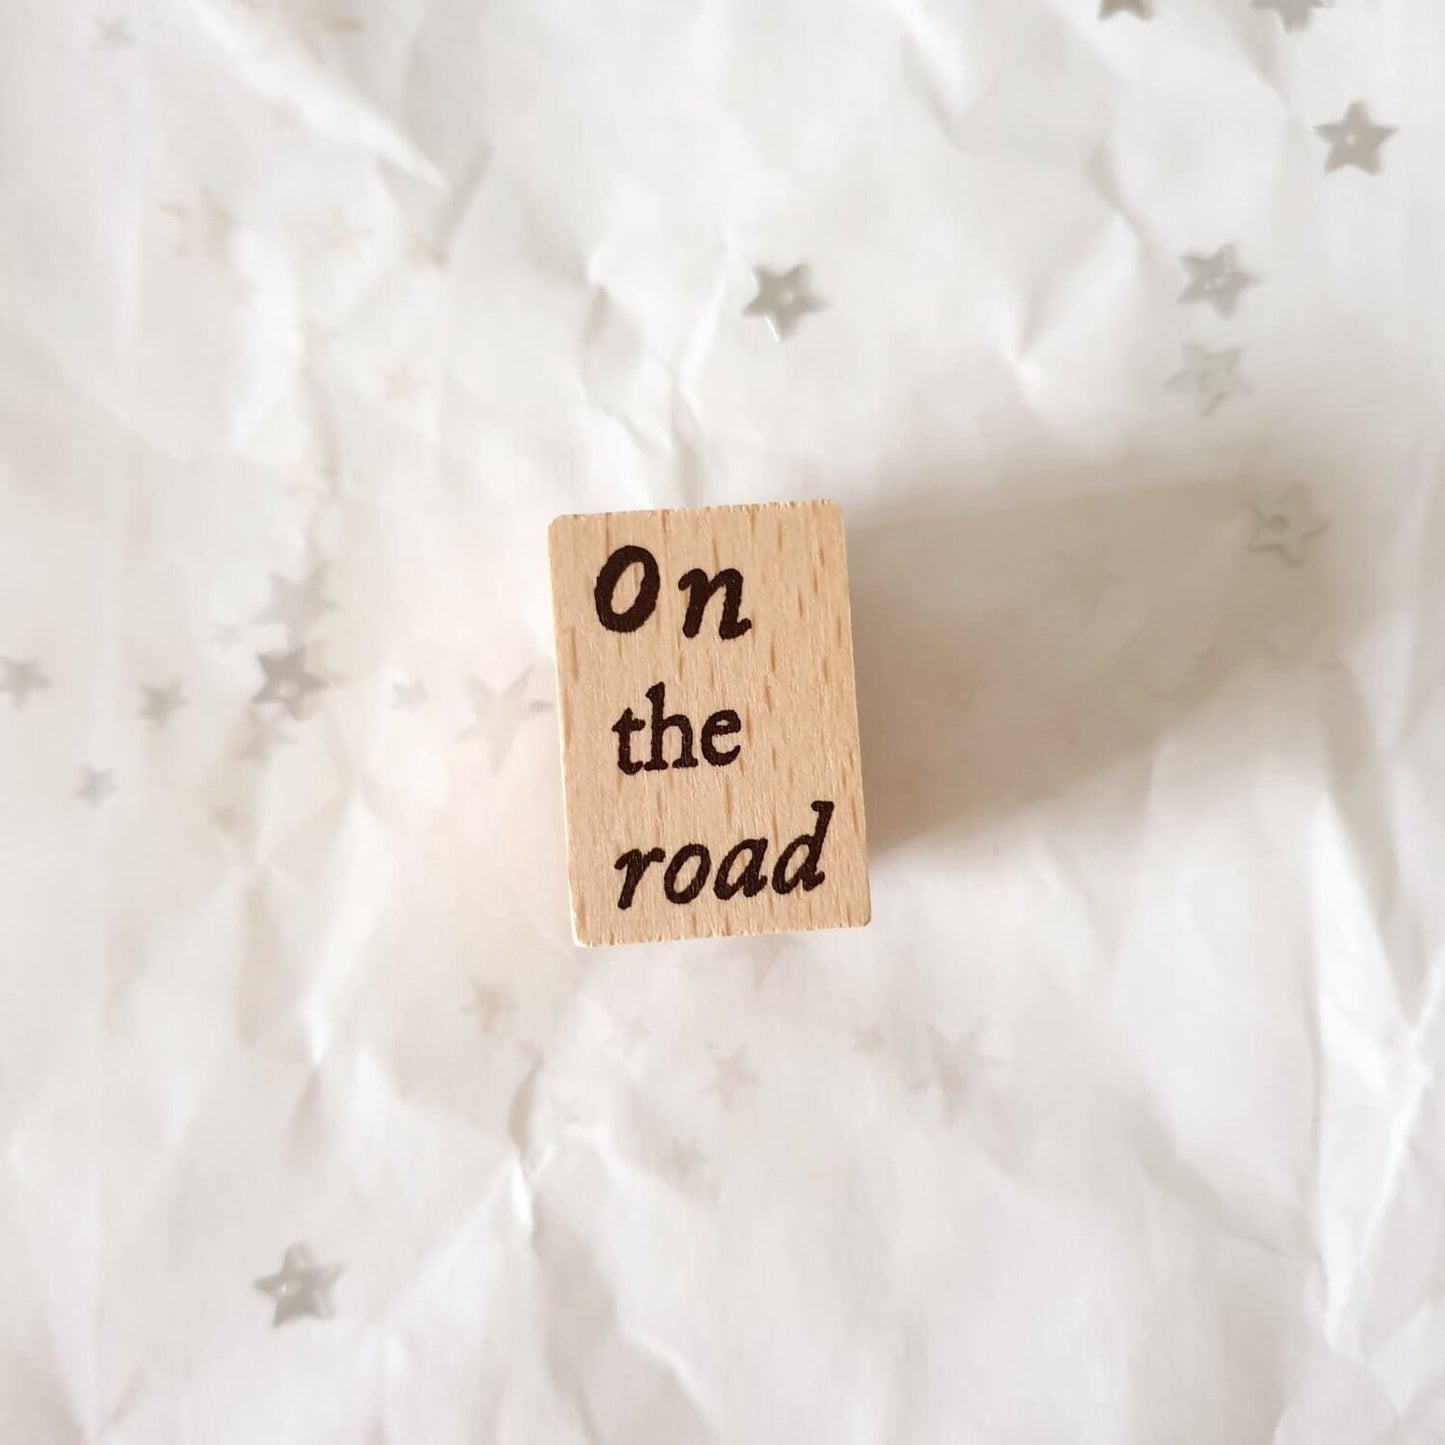 Yeon Charm On The Road Rubber Stamp, 1 pc